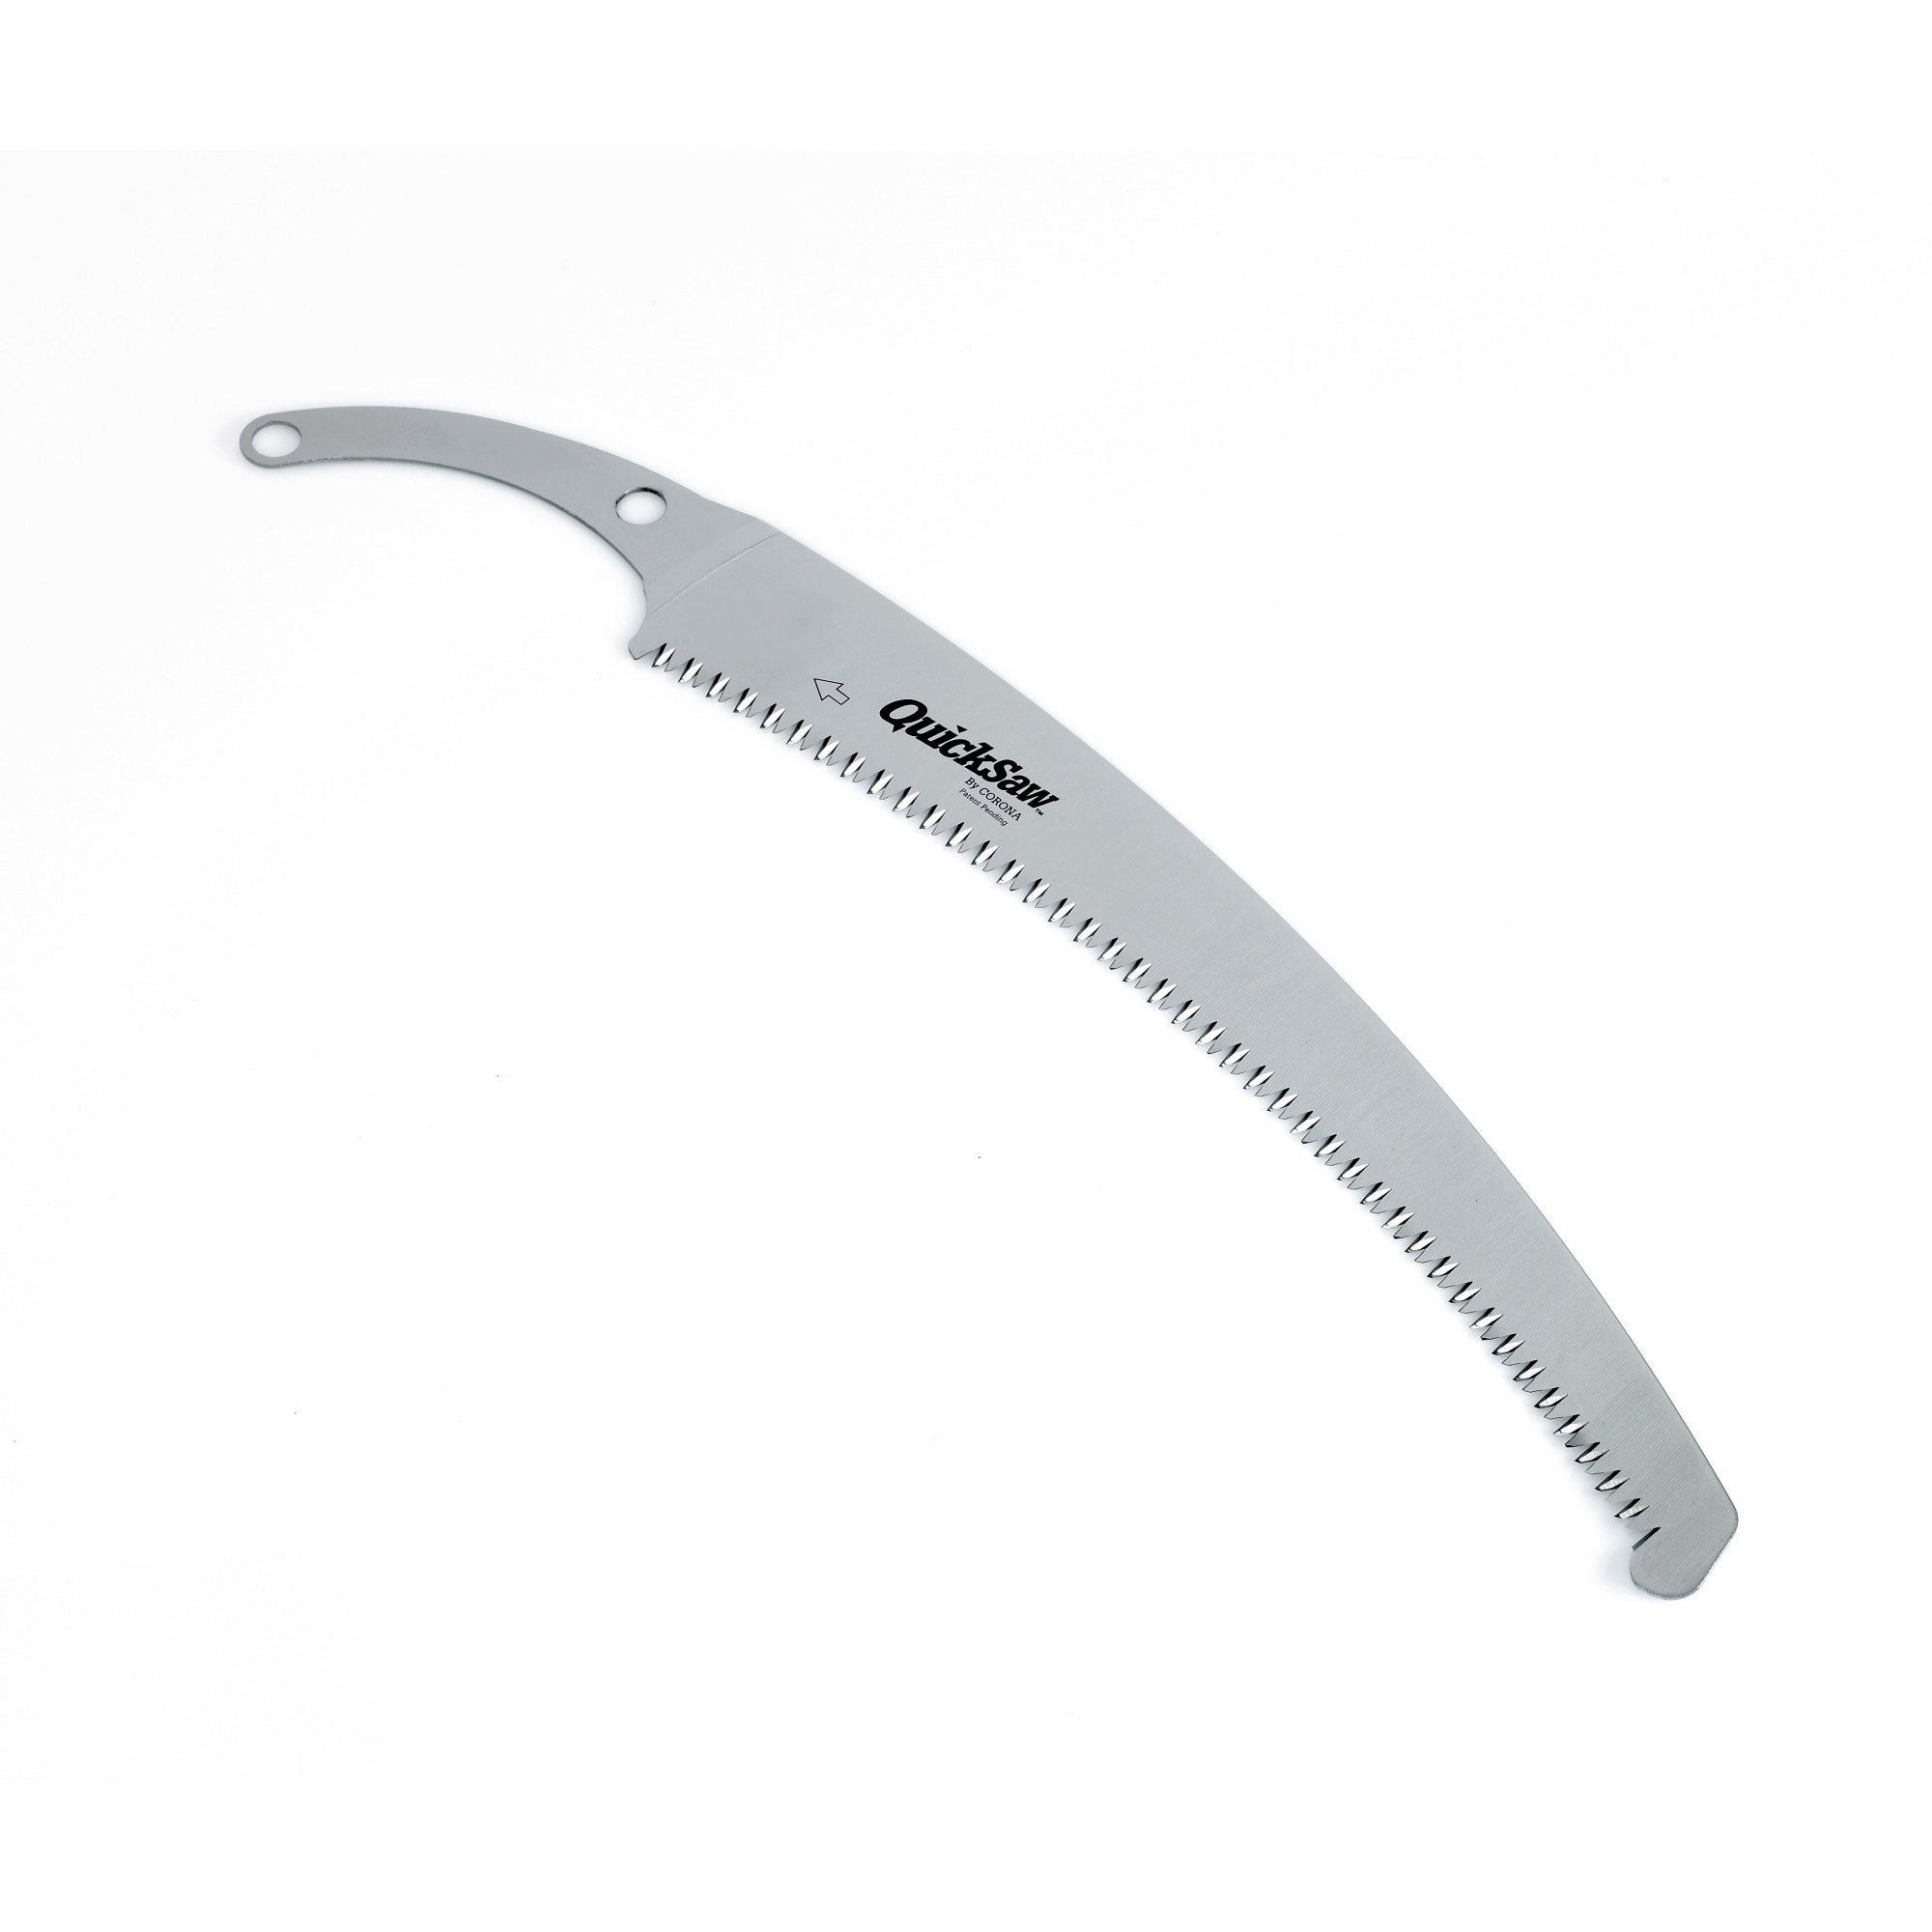 Replacement Blade for Pruning Saw